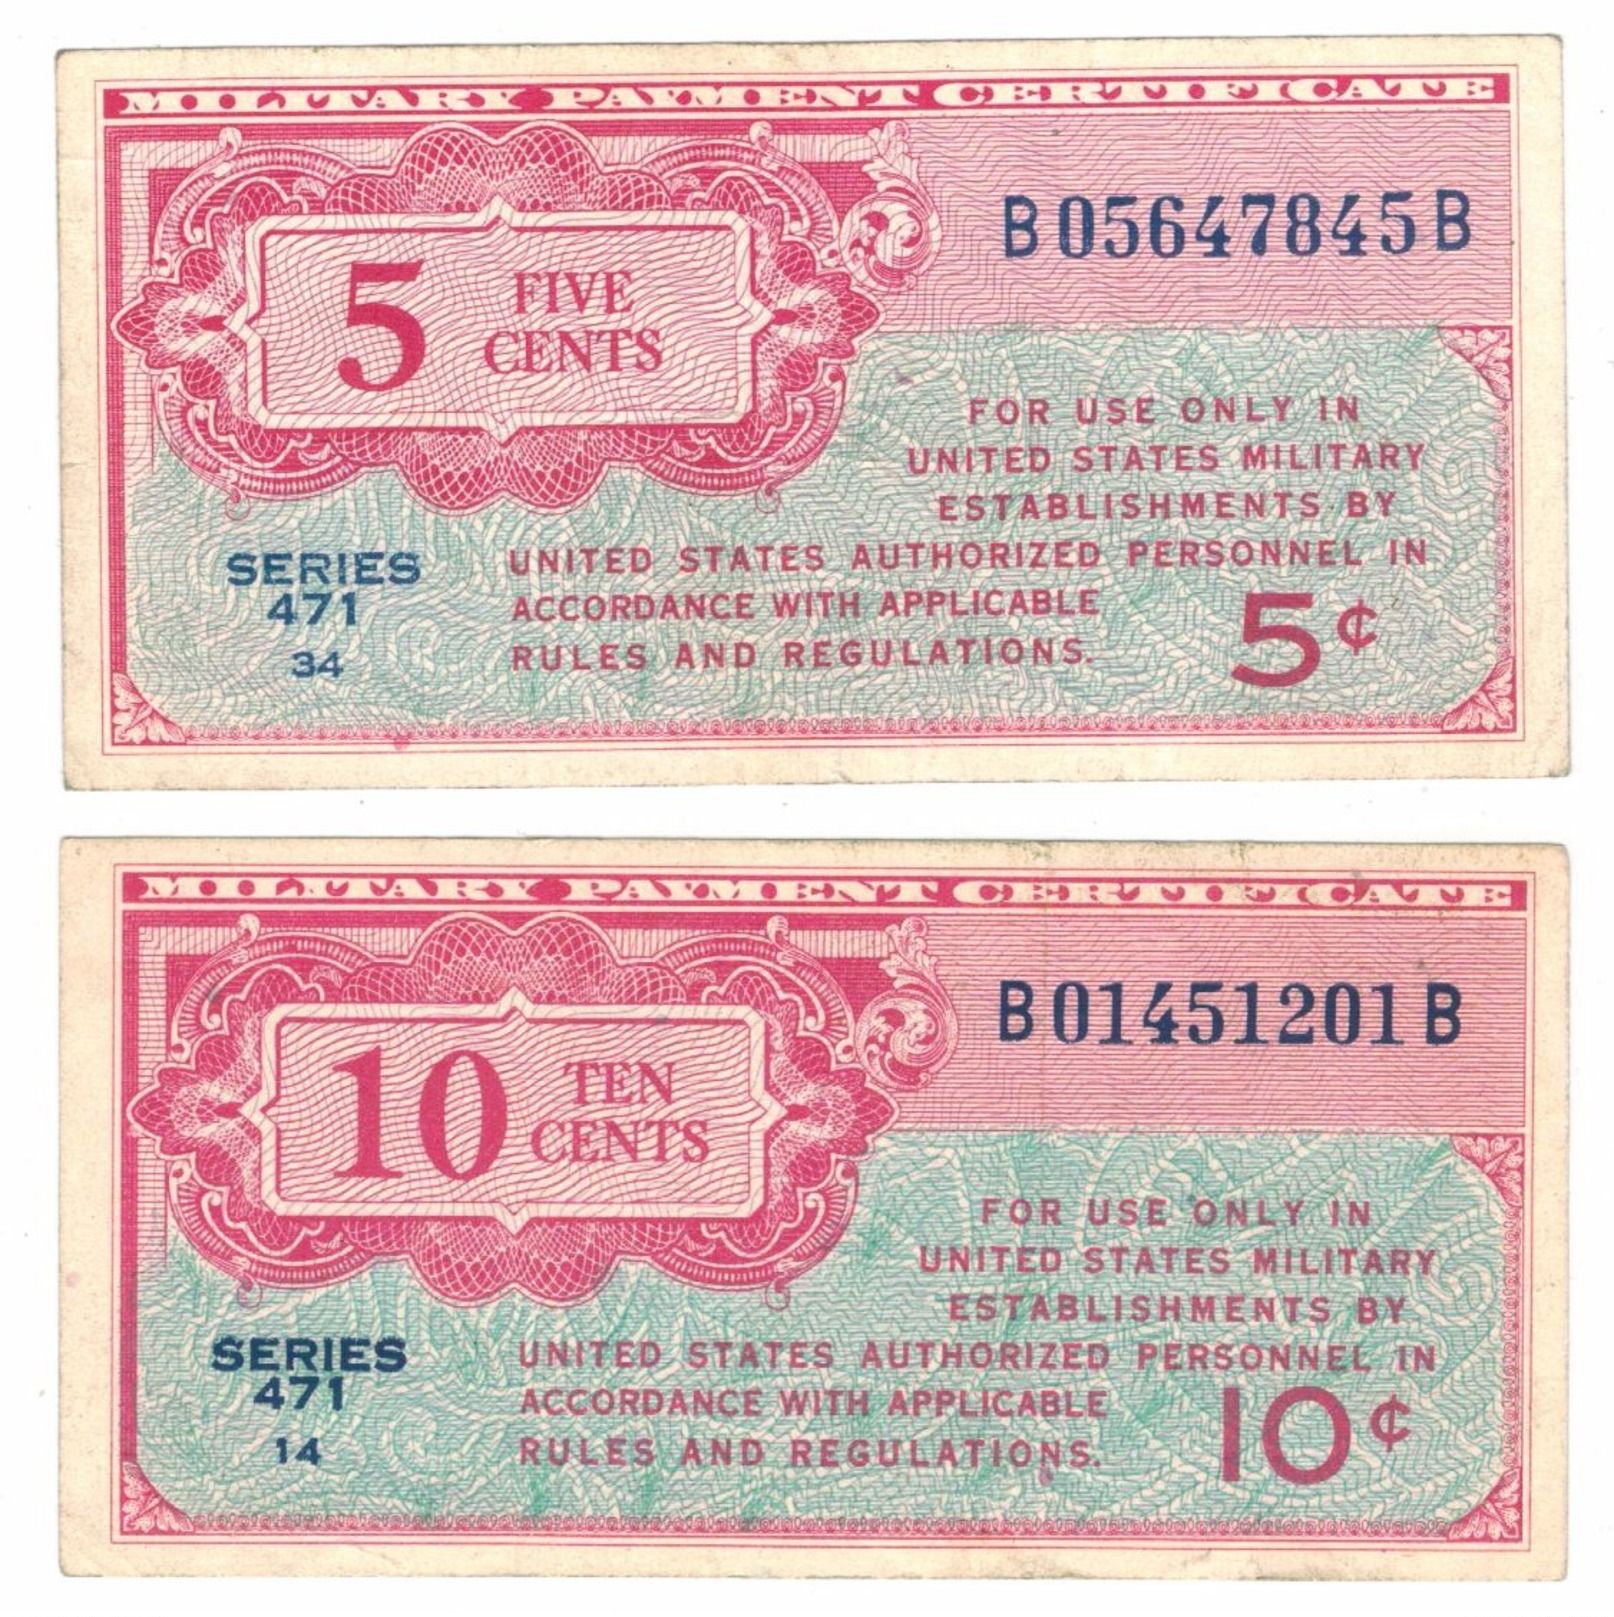 United STATES Of America , 5-10 Cents , Series 471, VF+ , FREE SHIP. TO USA. - 1947-1948 - Series 471